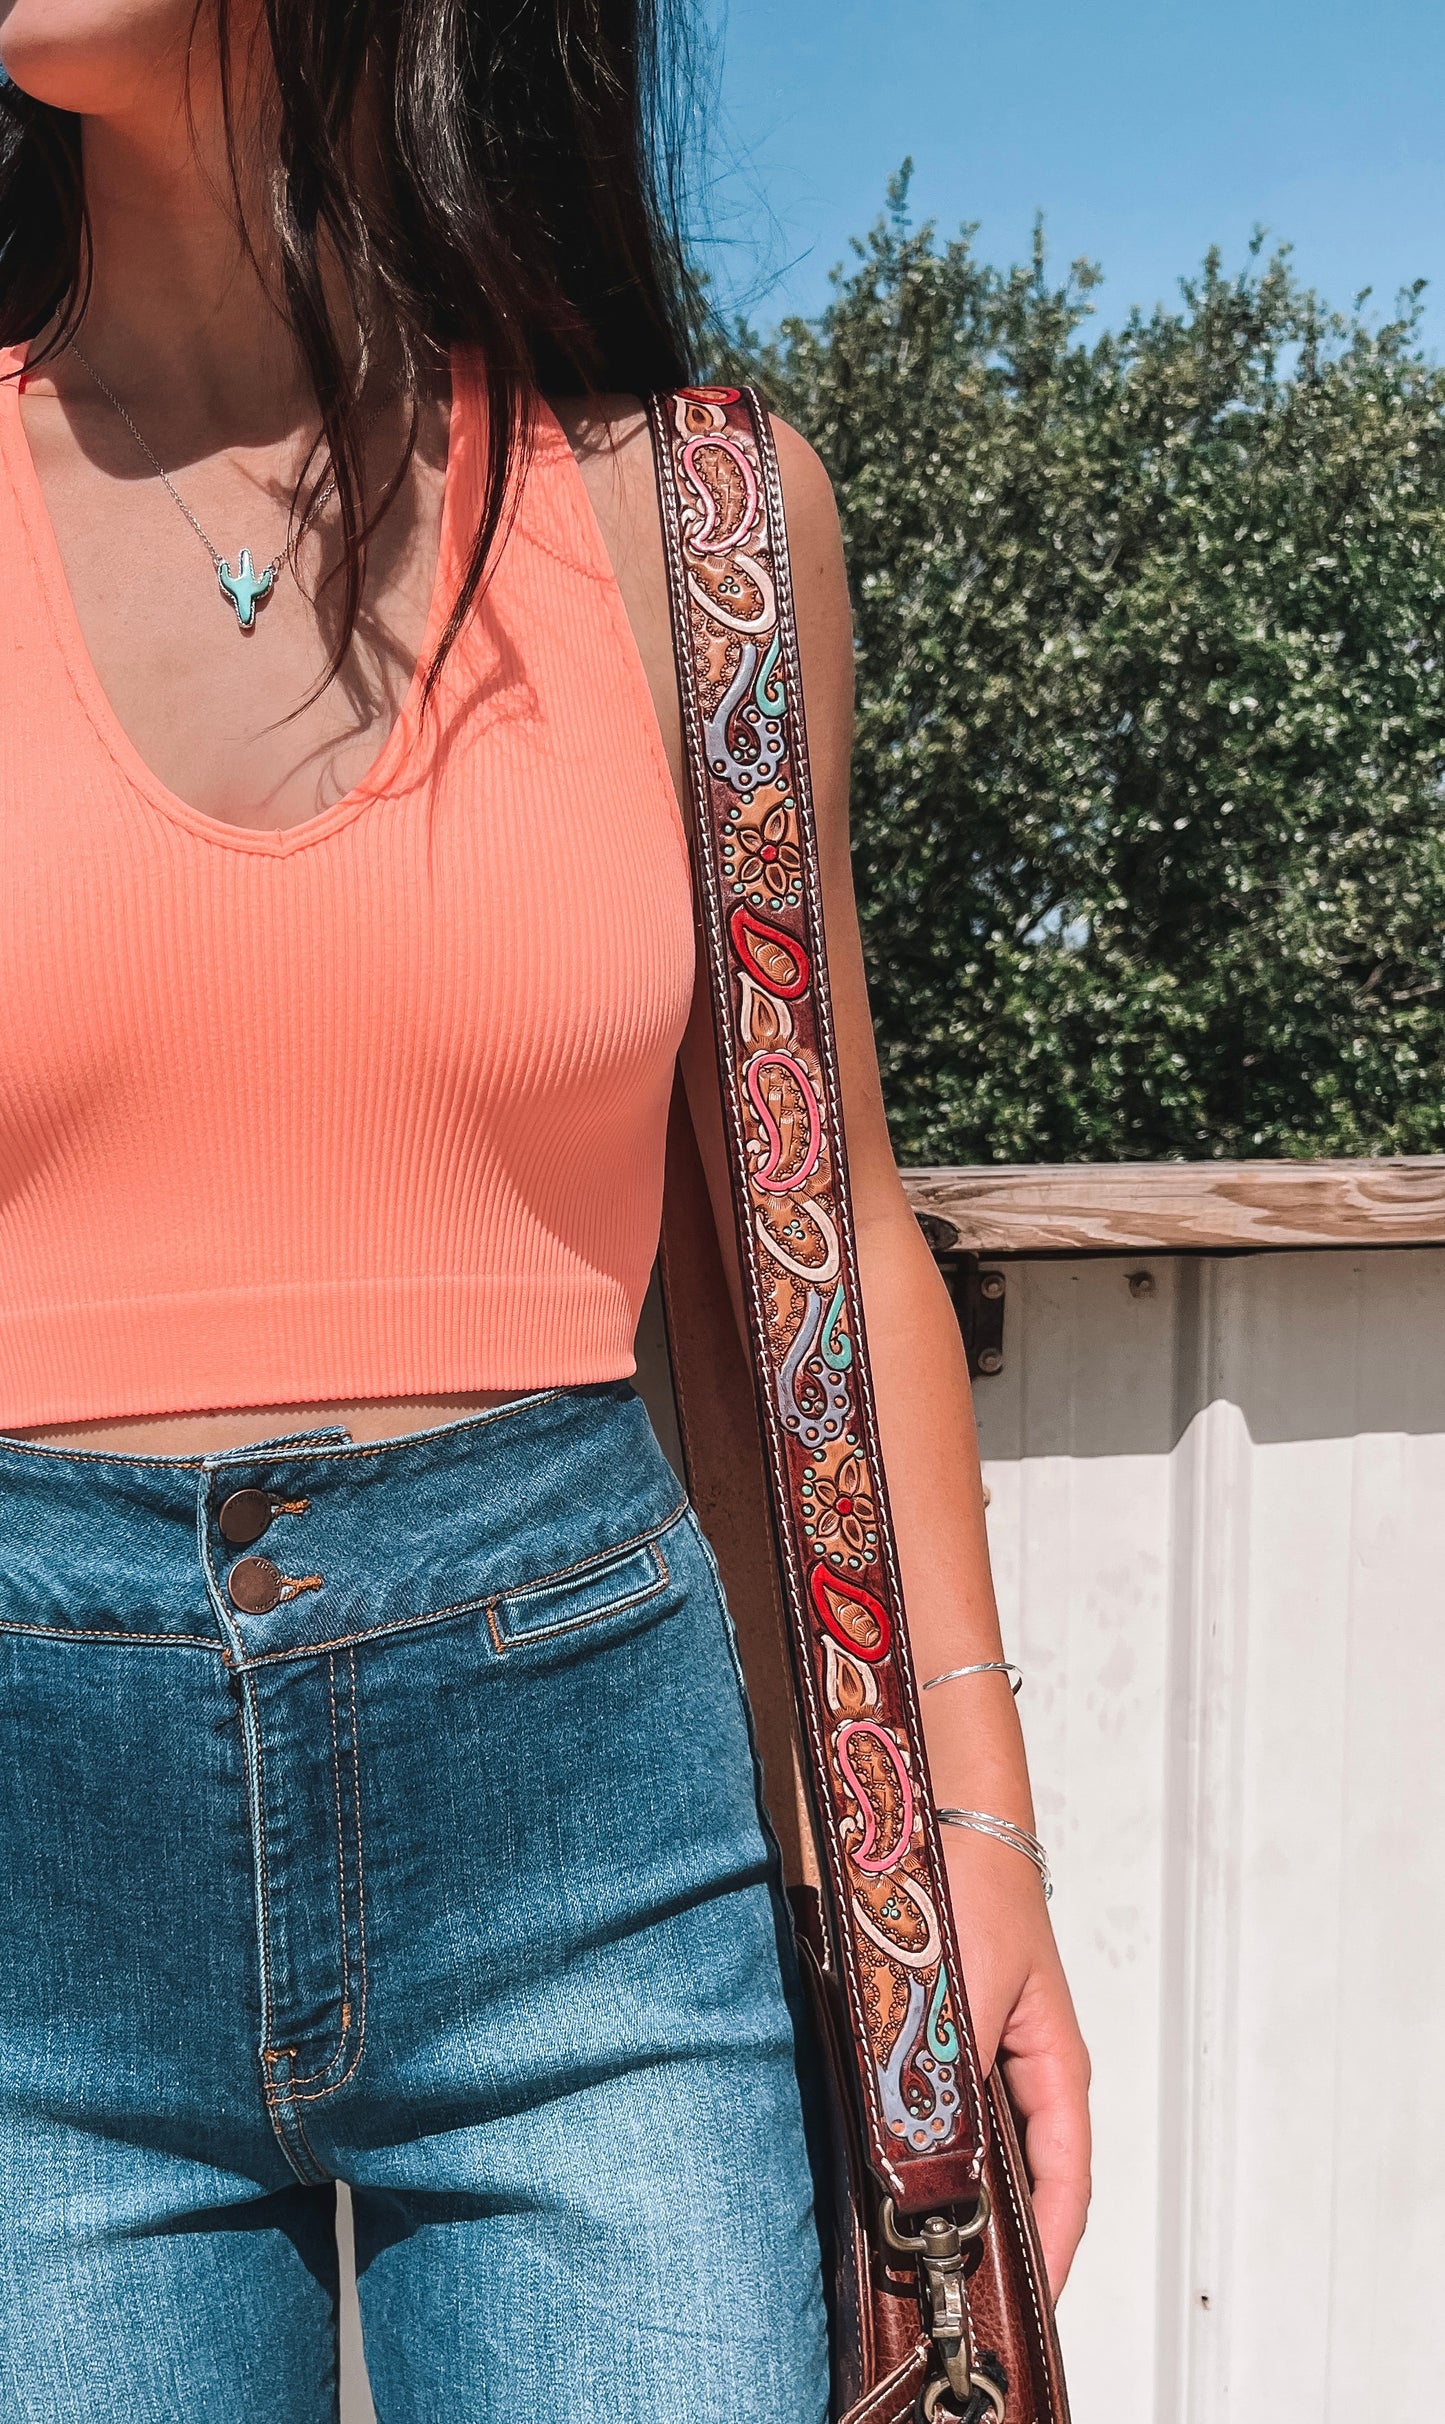 The Pop of Paisley Purse Strap